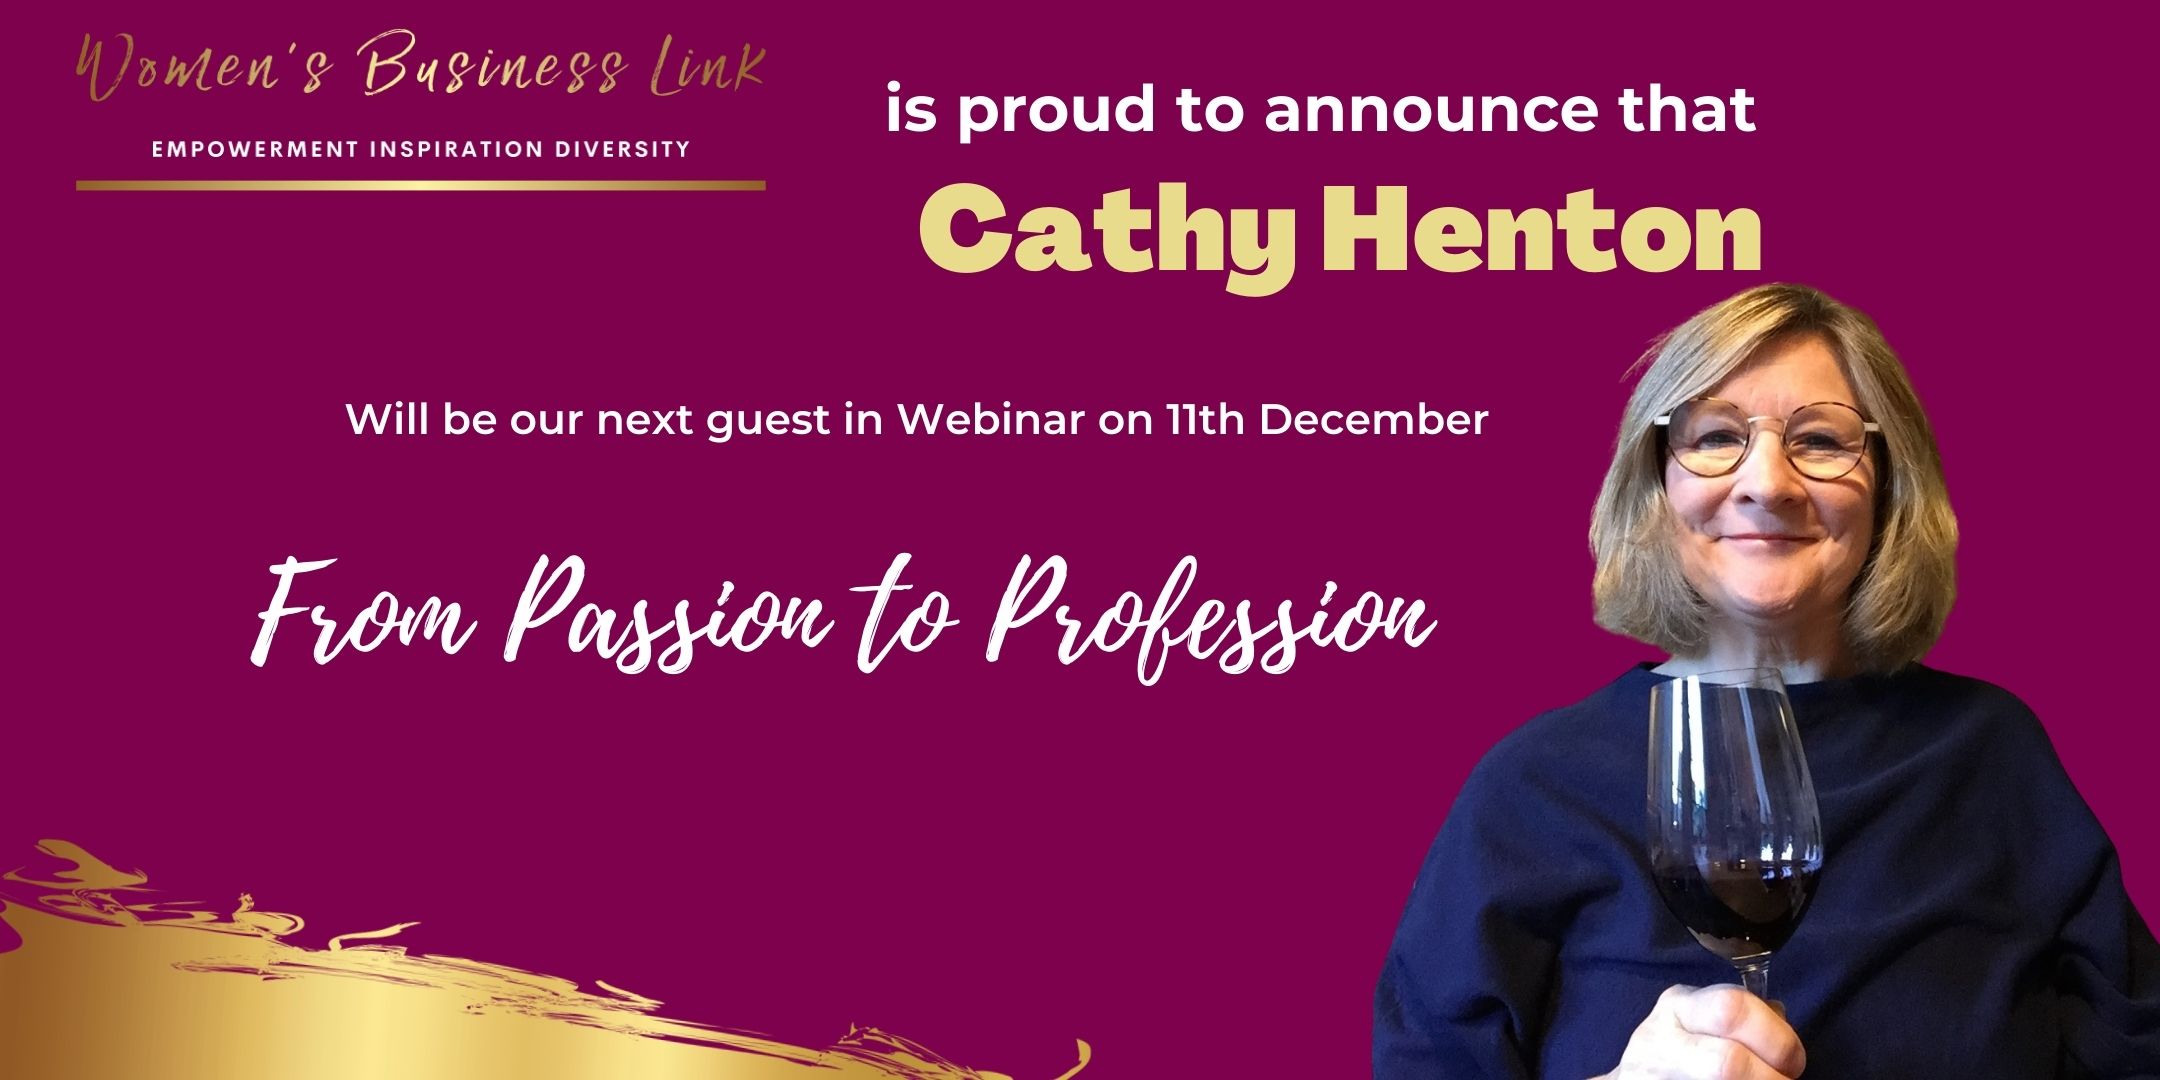 From Passion to Profession. A Women's Business Link webinar with Cathy Henton.